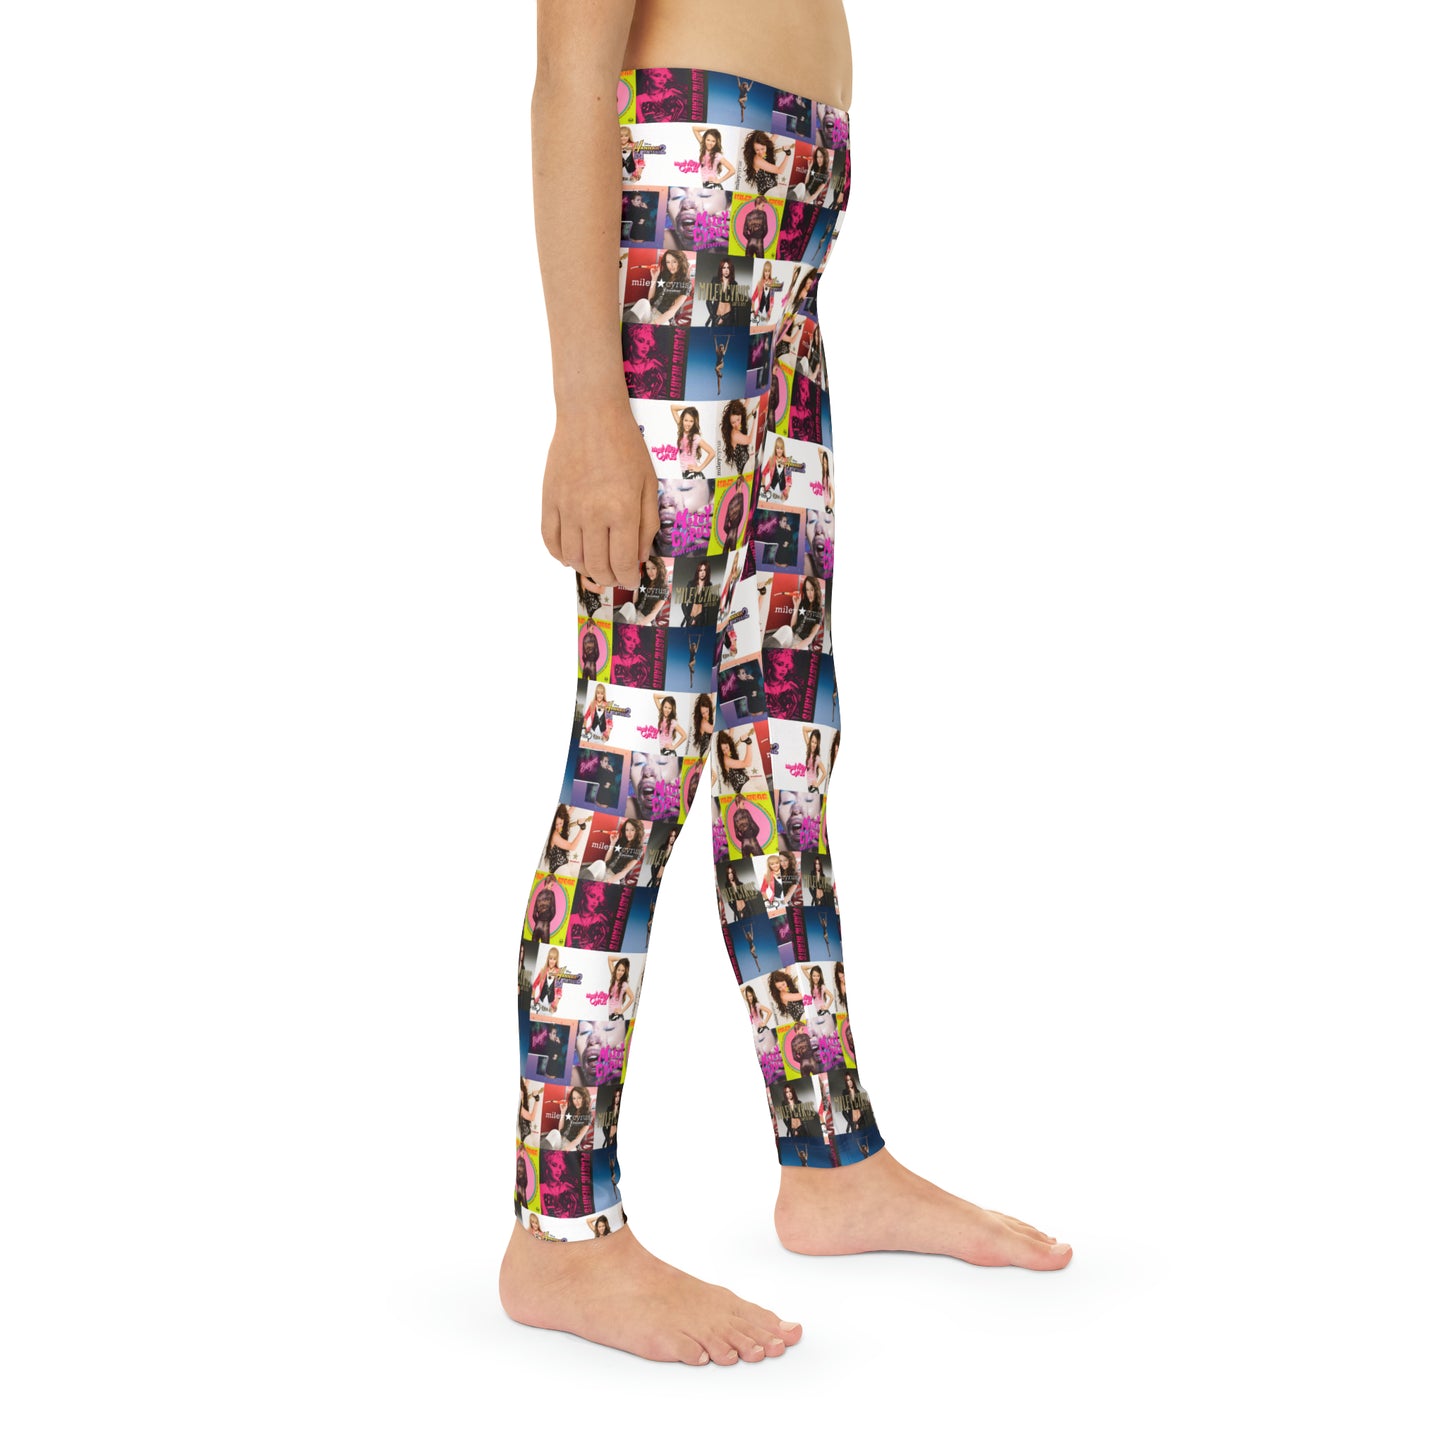 Miley Cyrus Album Cover Collage Youth Leggings